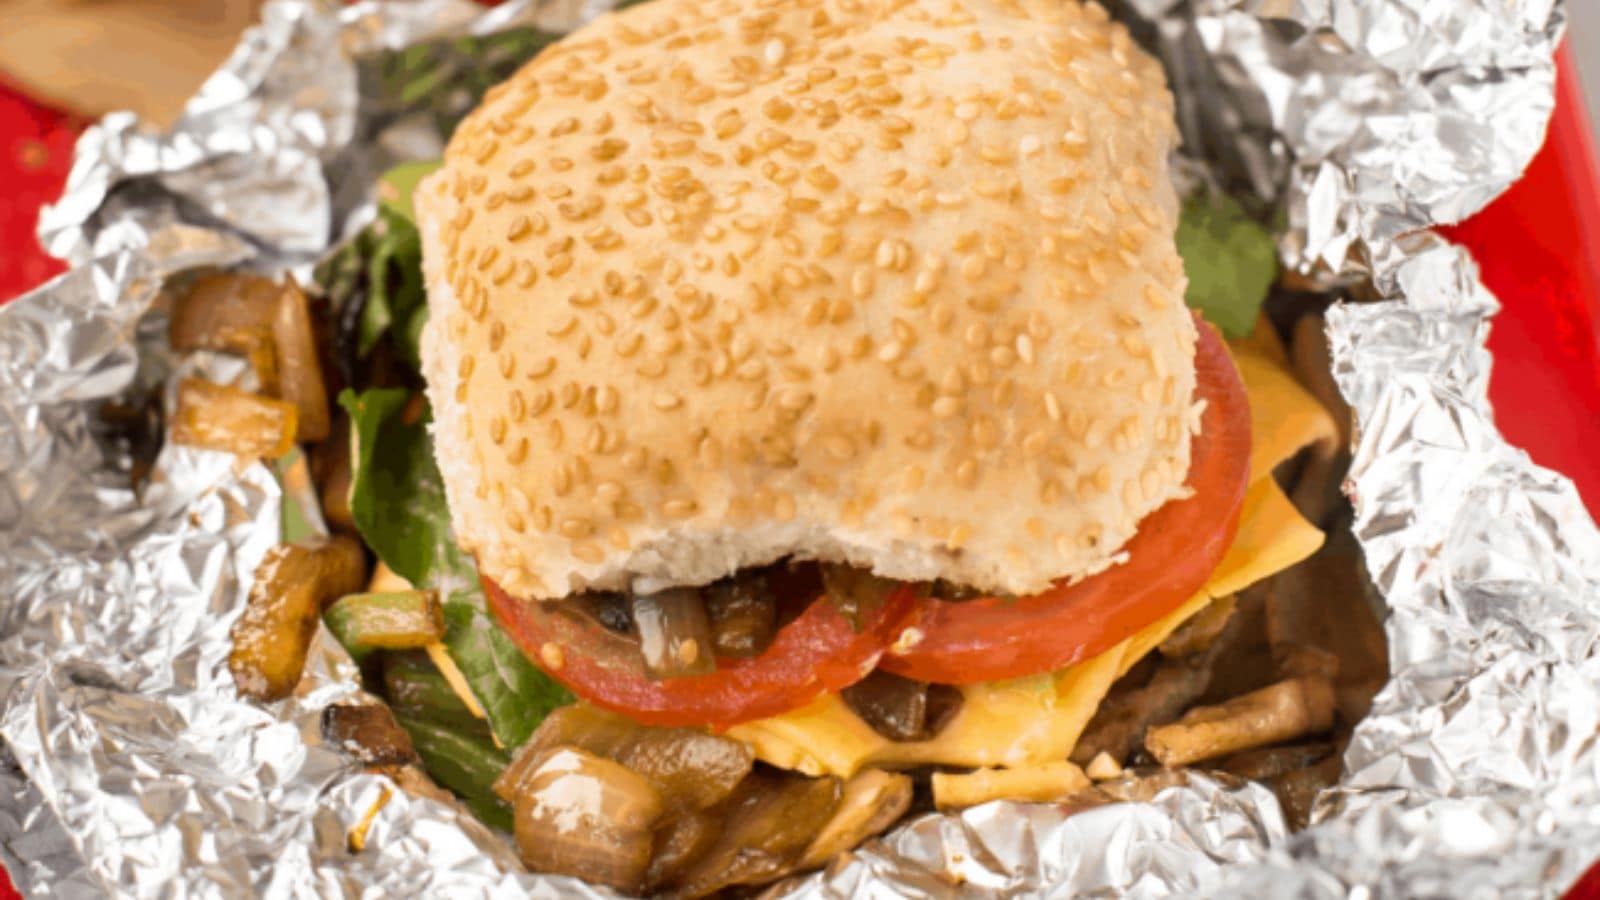 A grilled veggie and cheese sandwich on a bun.